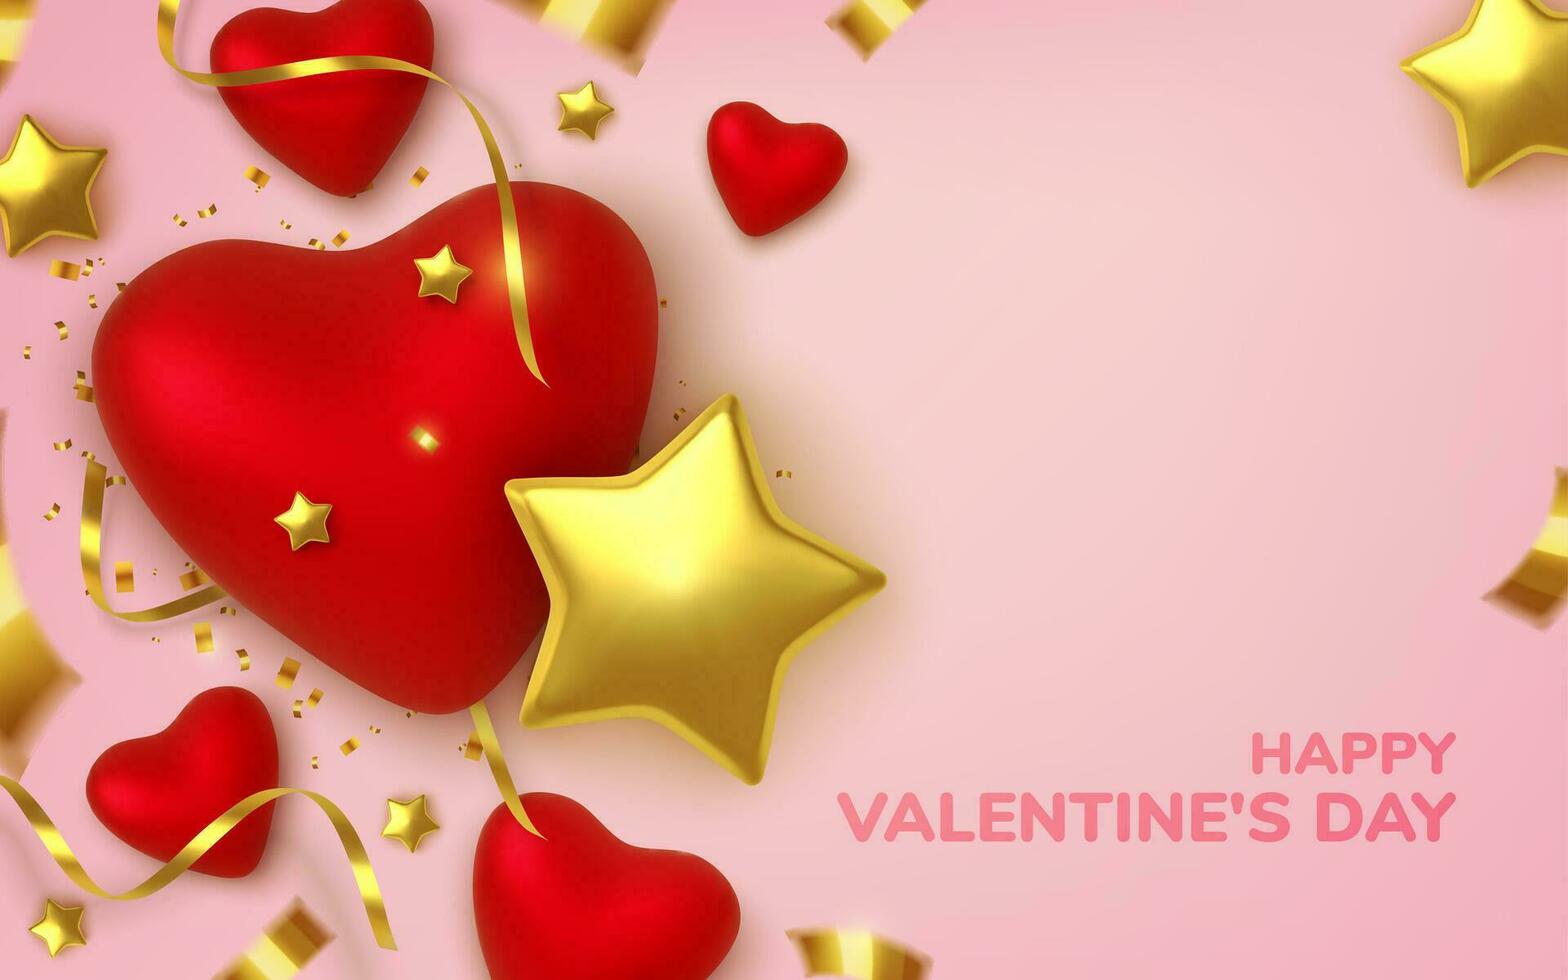 Valentines Day greeting card. Realistic 3d red hearts in tinsel vector